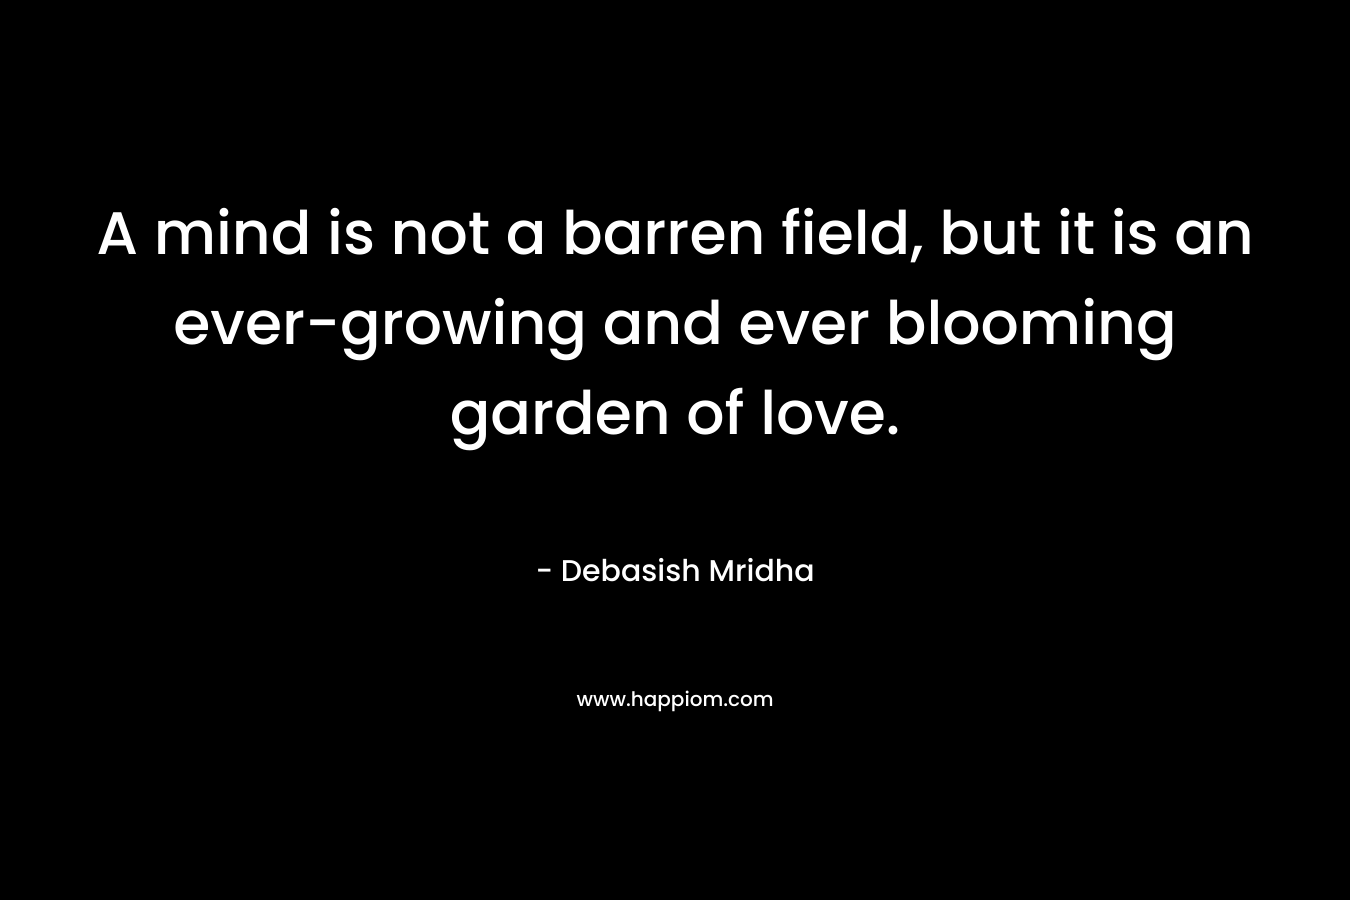 A mind is not a barren field, but it is an ever-growing and ever blooming garden of love. – Debasish Mridha